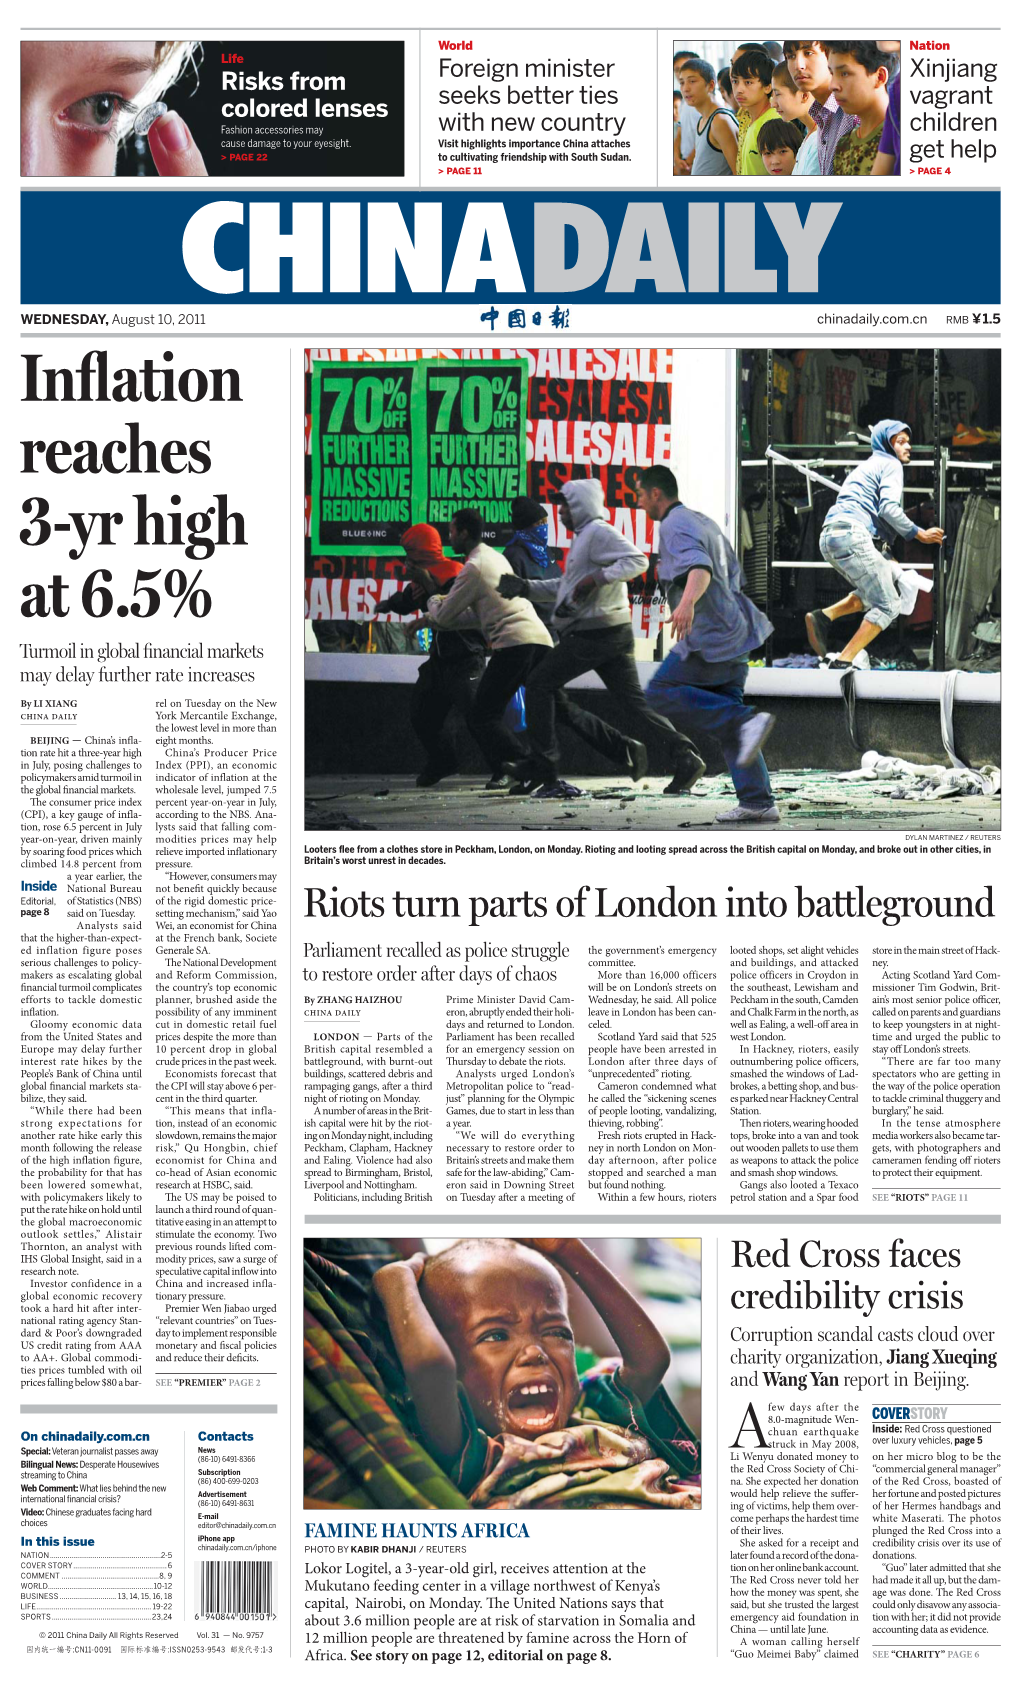 Inflation Reaches 3-Yr High at 6.5%